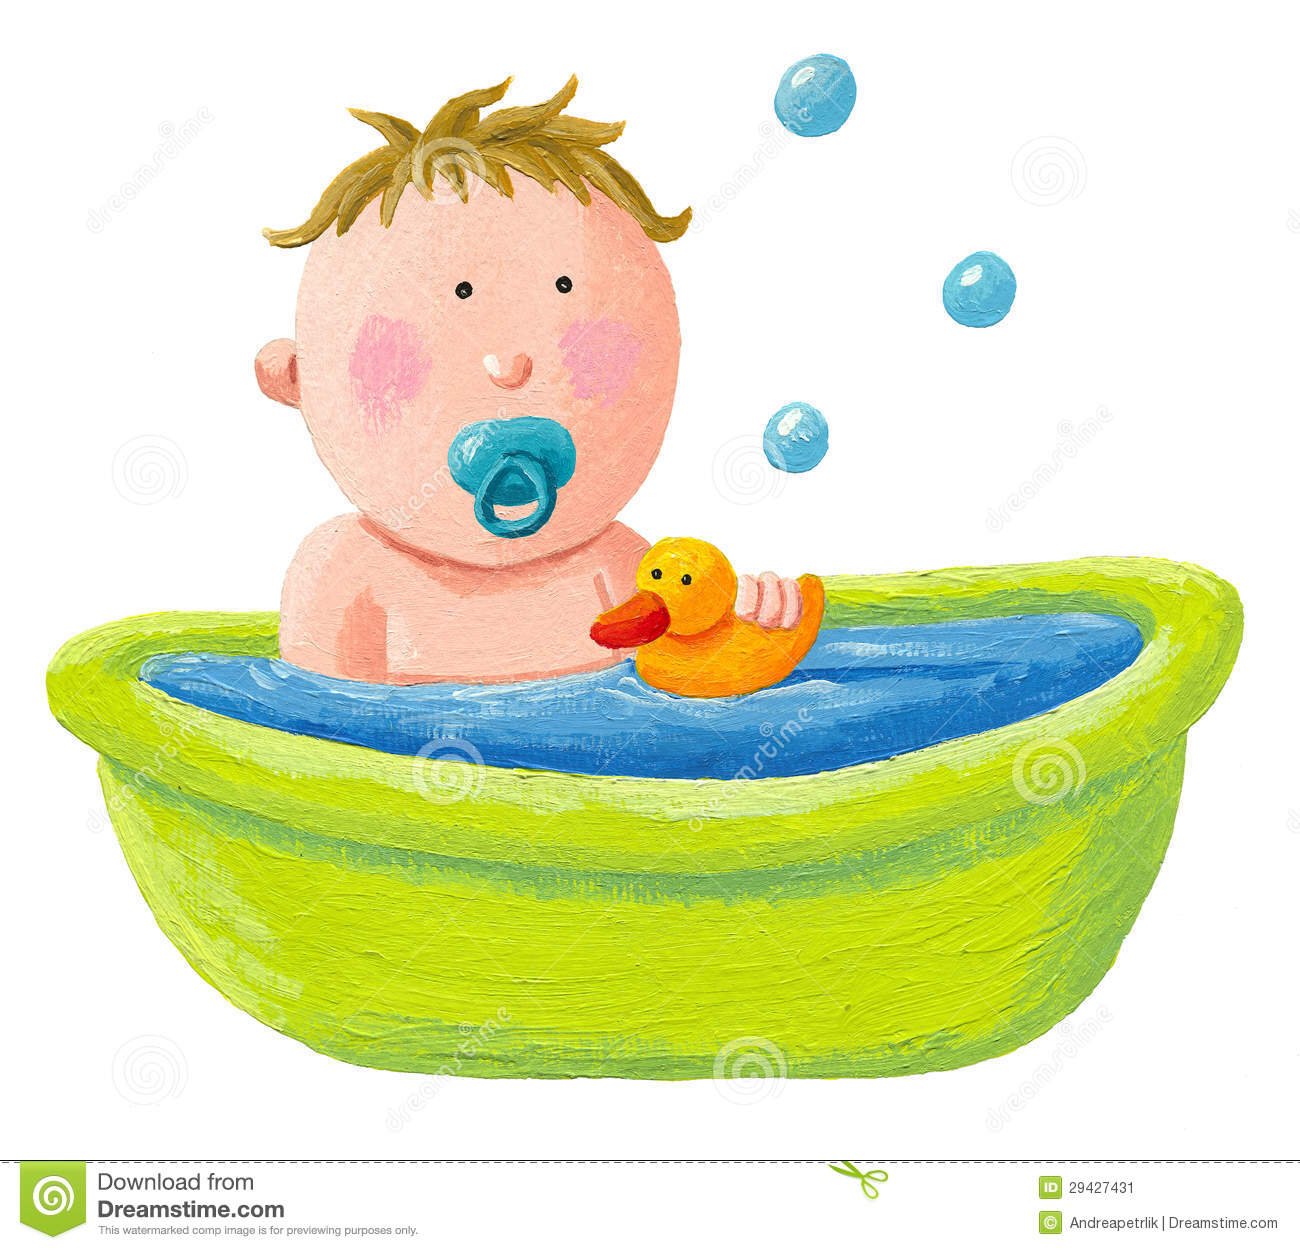 Acrylic Illustration Of Baby Bath With A Yellow Rubber Duck